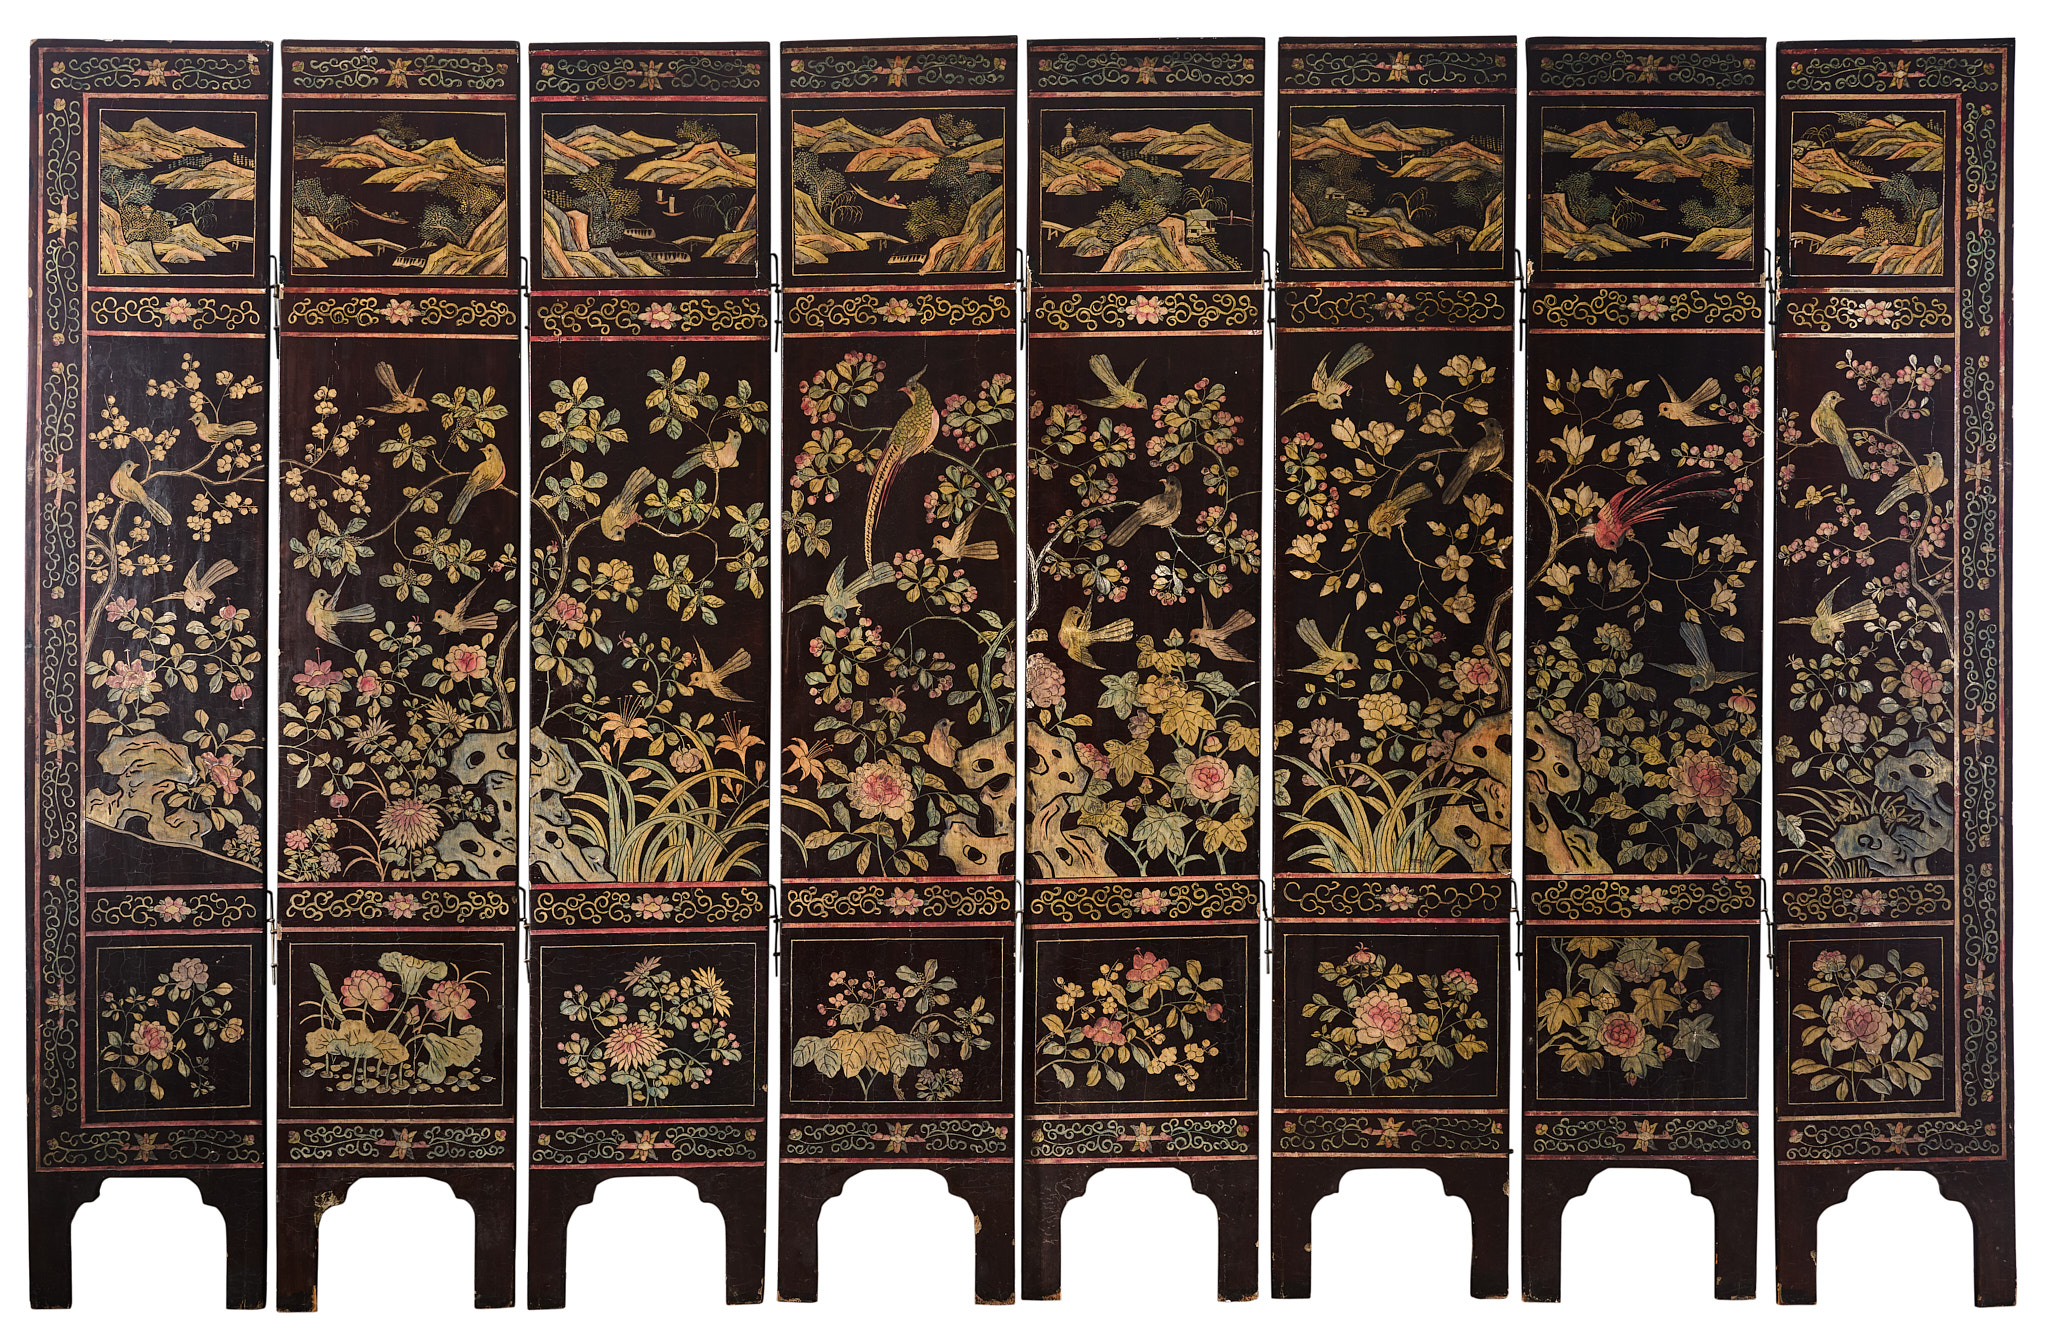 A CHINESE EIGHT-FOLD COROMANDEL LACQUER SCREEN, LATE QING DYNASTY, 19TH CENTURY - Image 2 of 2